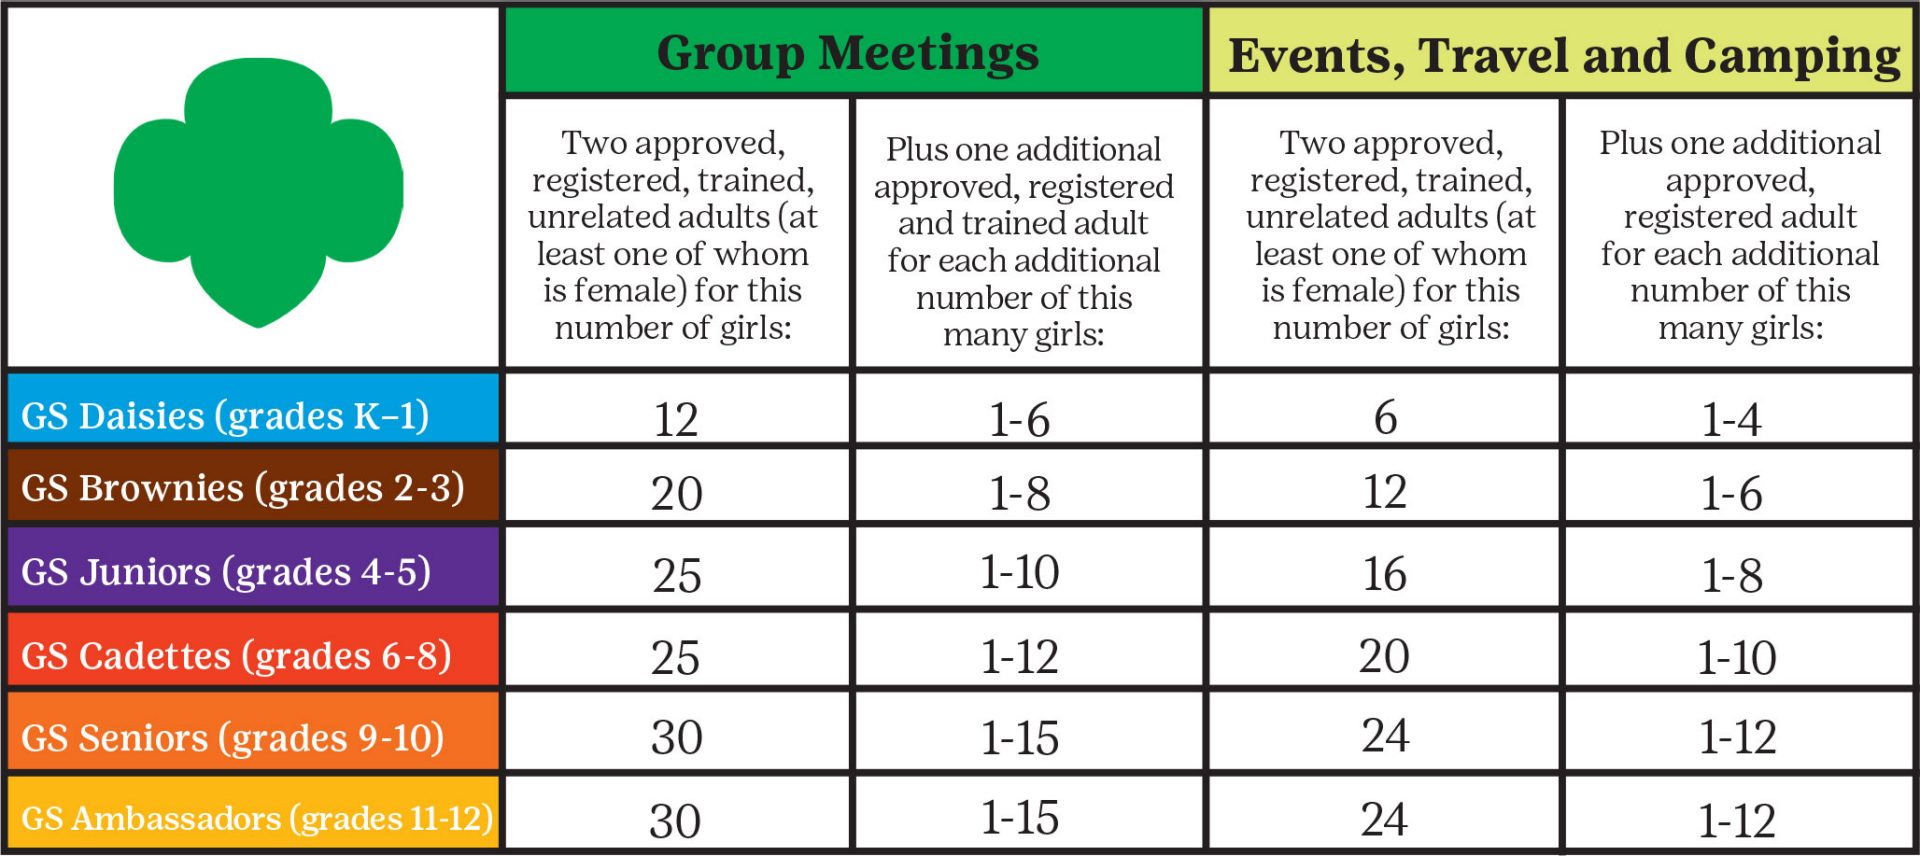 Chart broken down by Girl Scout level and group meeting girl to adult ratio